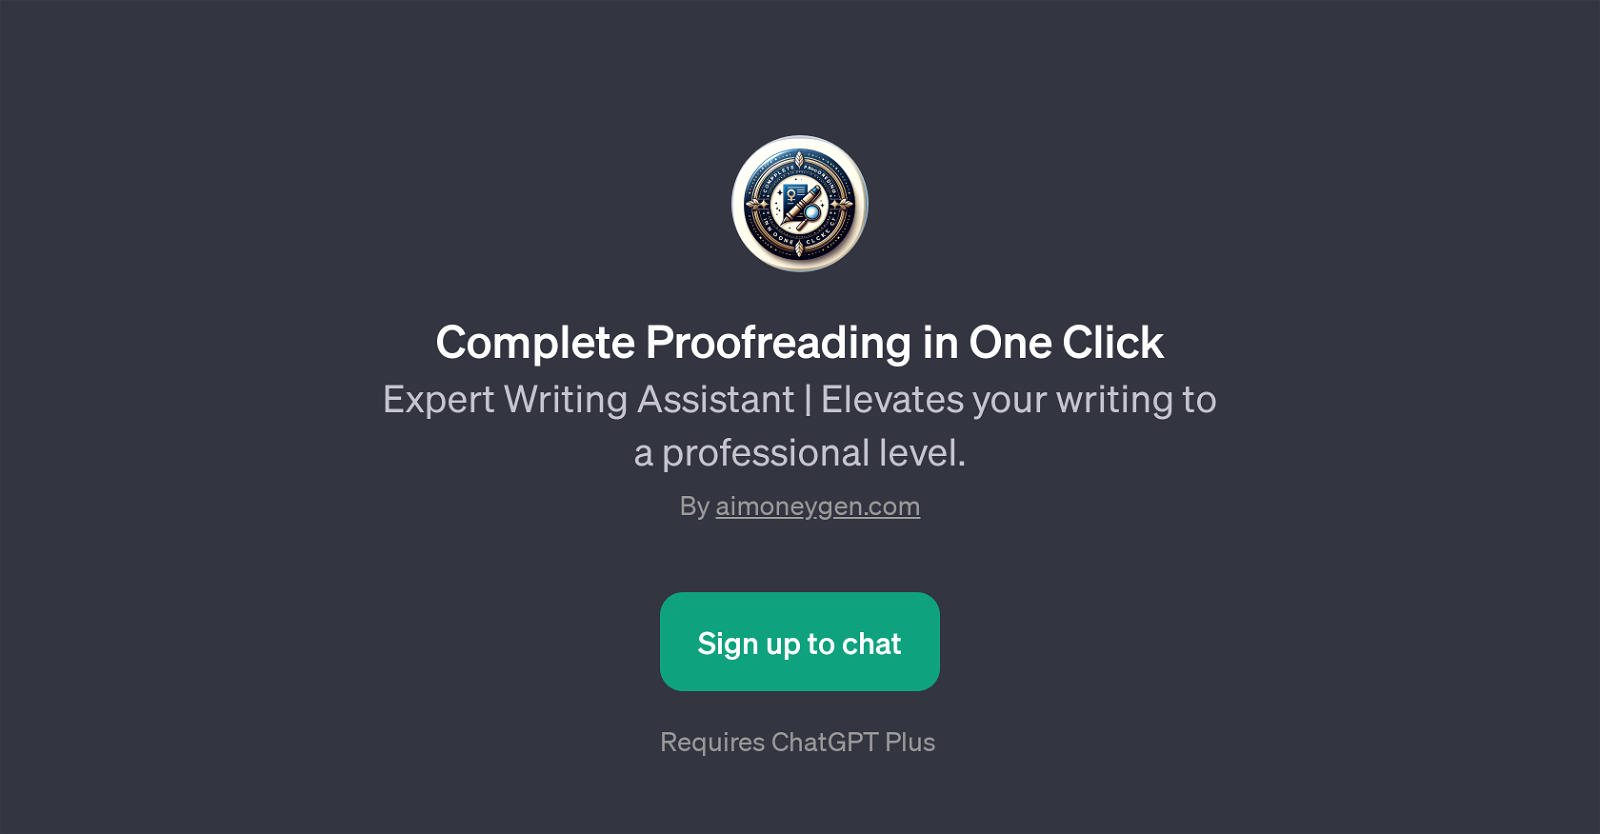 Complete Proofreading in One Click website